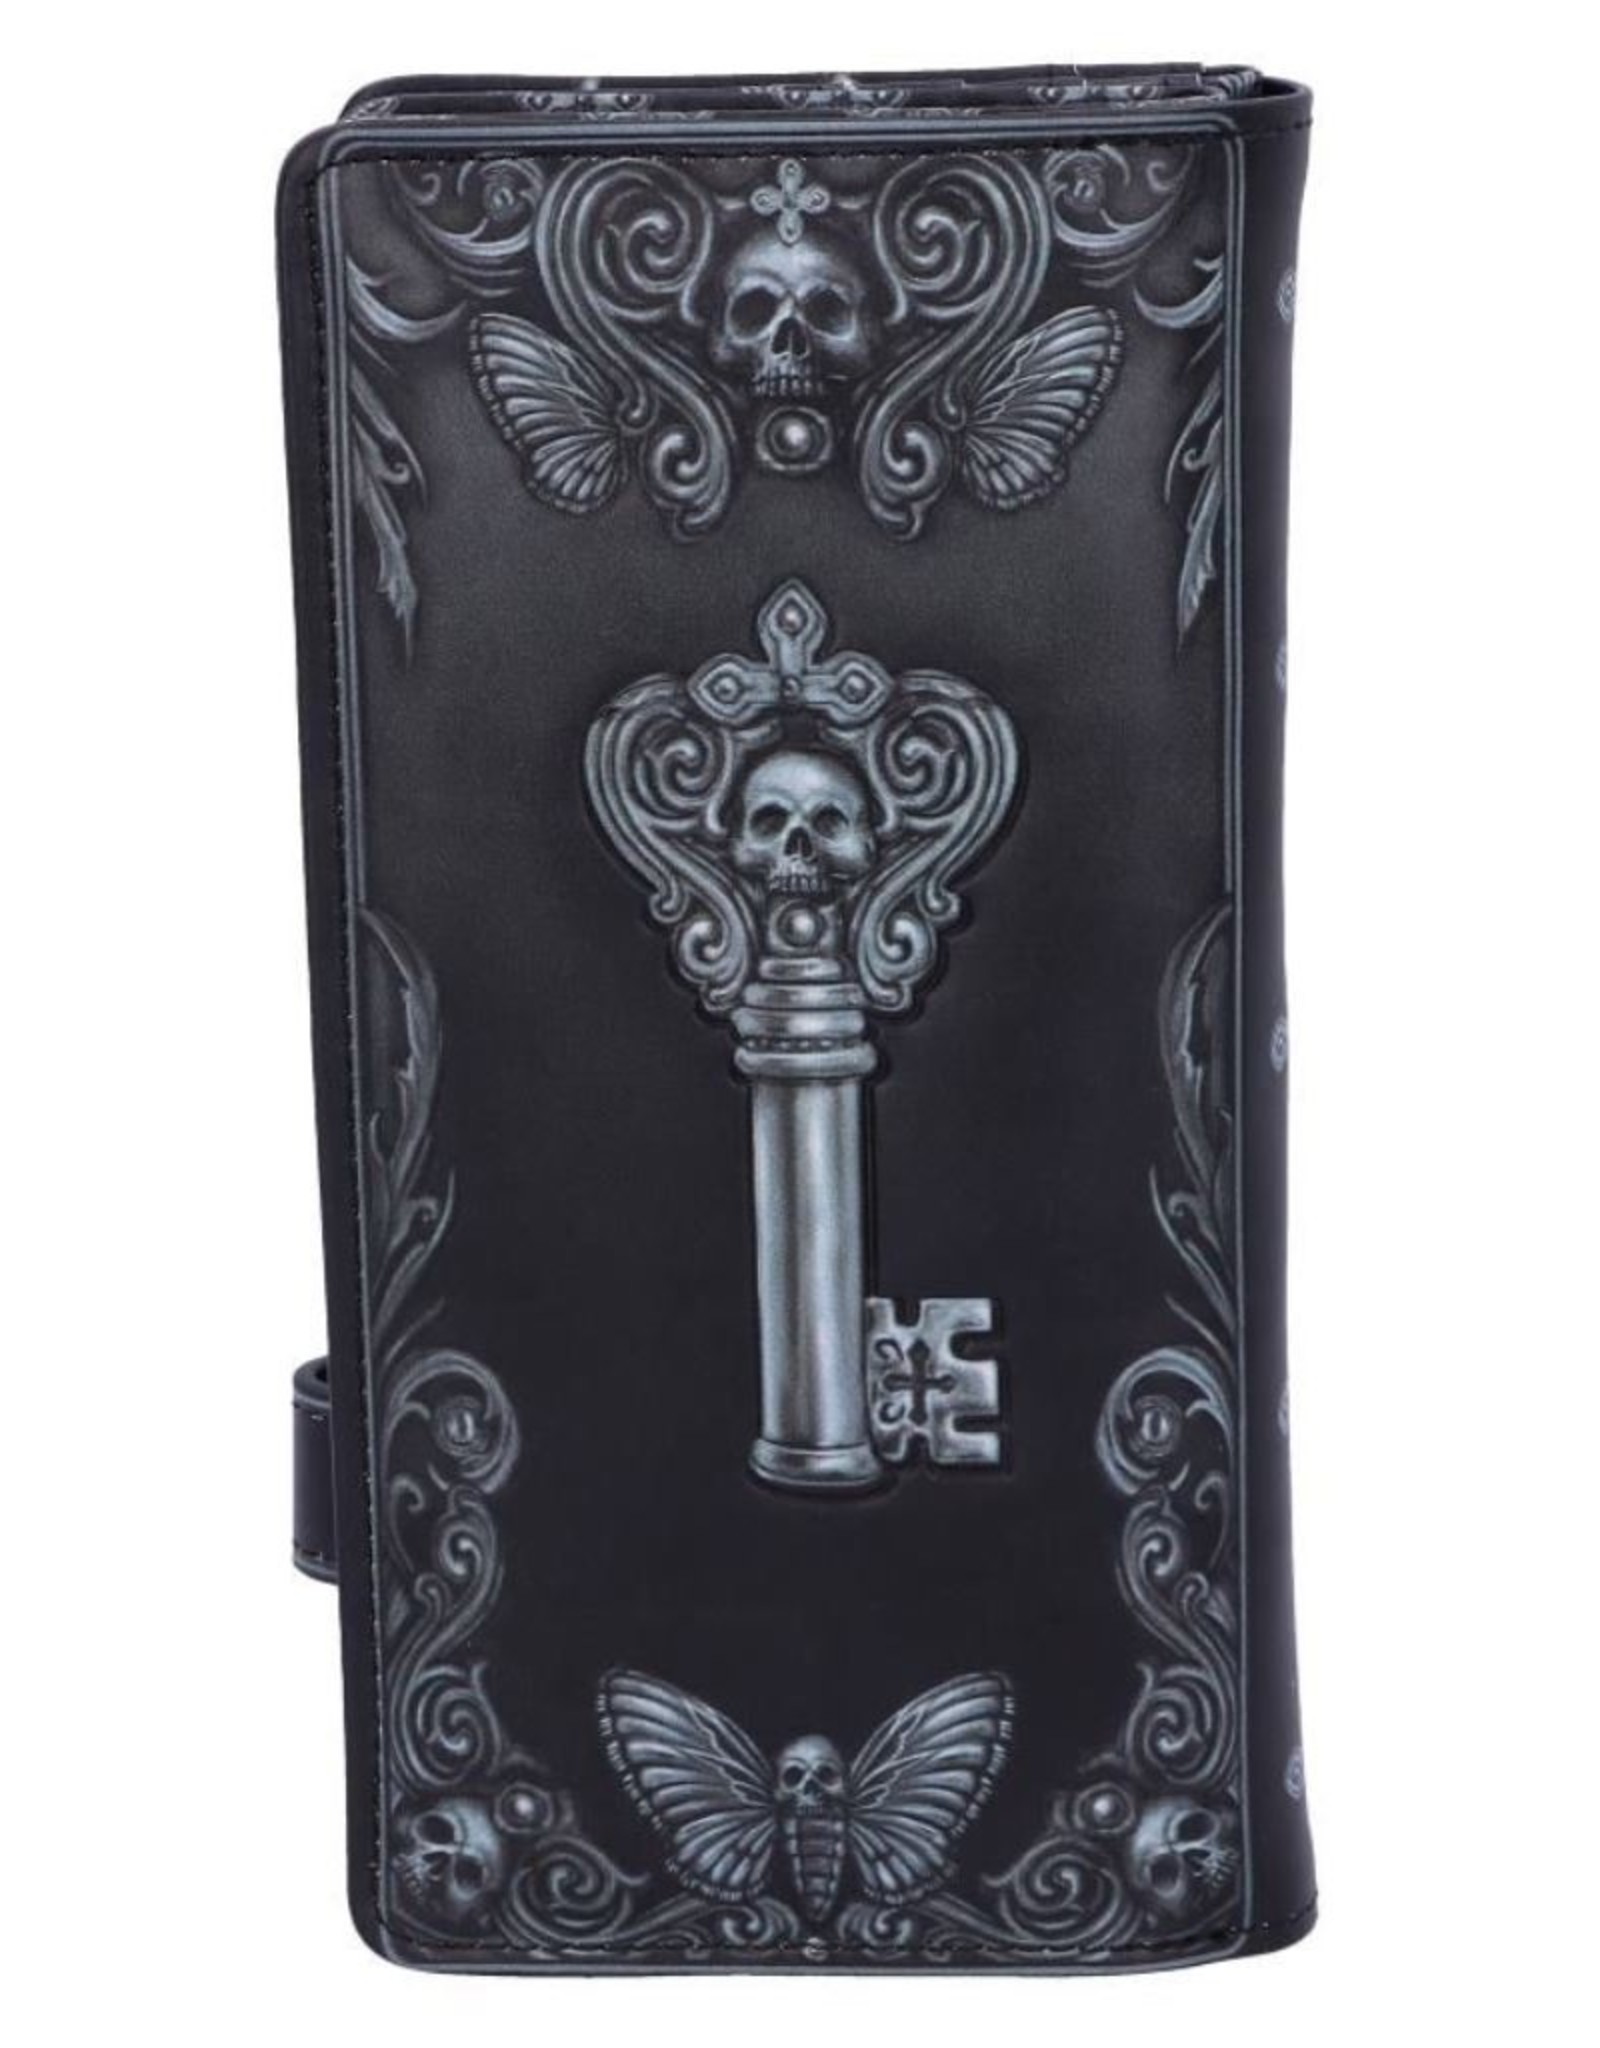 Nemesis Now Gothic wallets and purses - Edgar's Raven Embossed Purse Nemesis Now